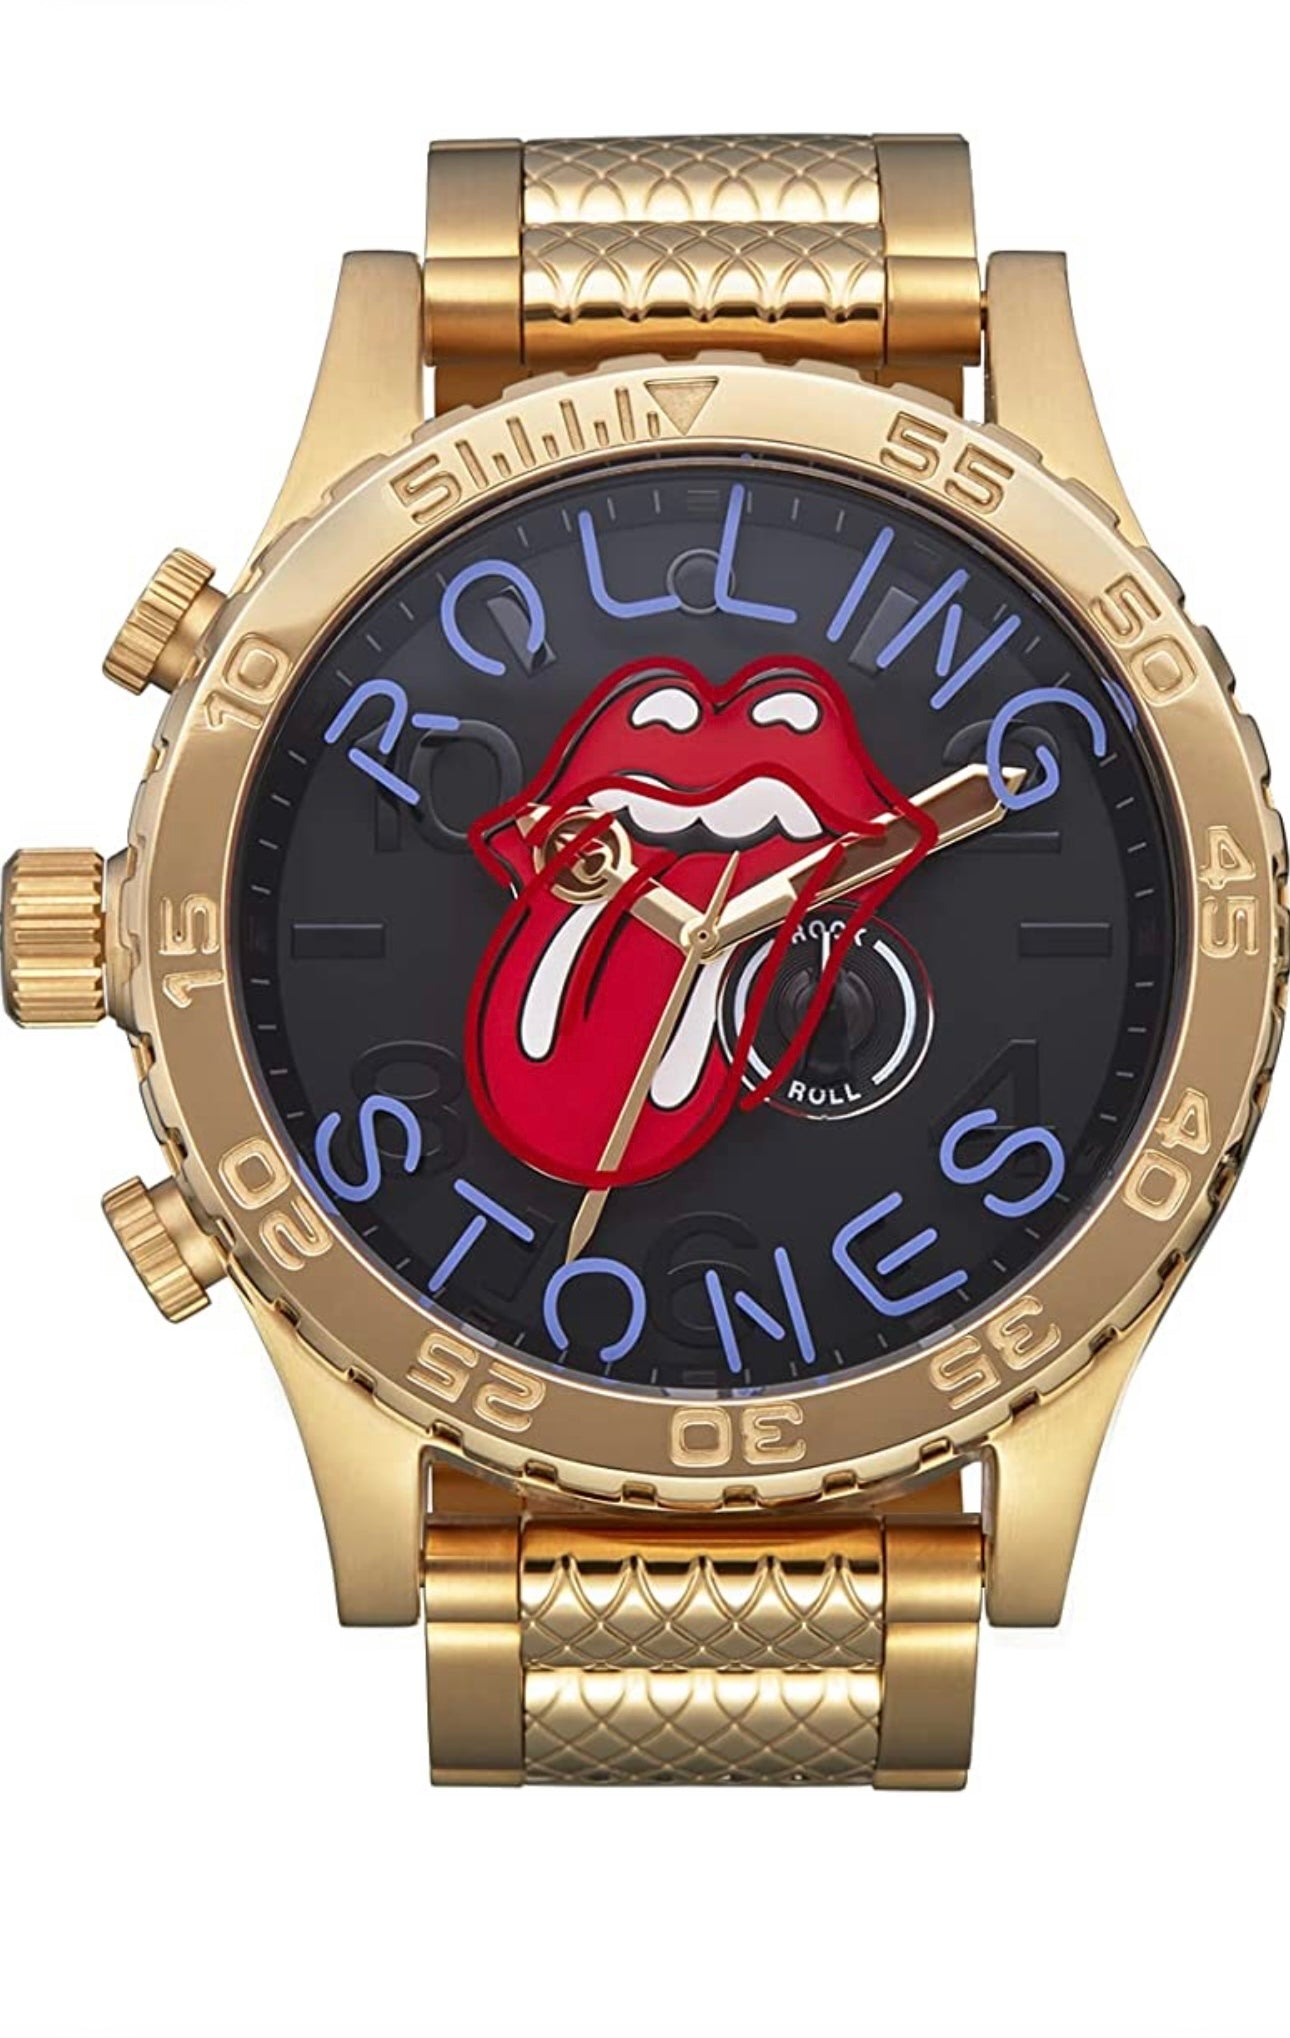 Nixon x Rolling Stones 51-30 A1355-300m Water Resistant Mens Analogue Fashion Watch (51mm Watch Face, 25mm Stainless Steel Band)